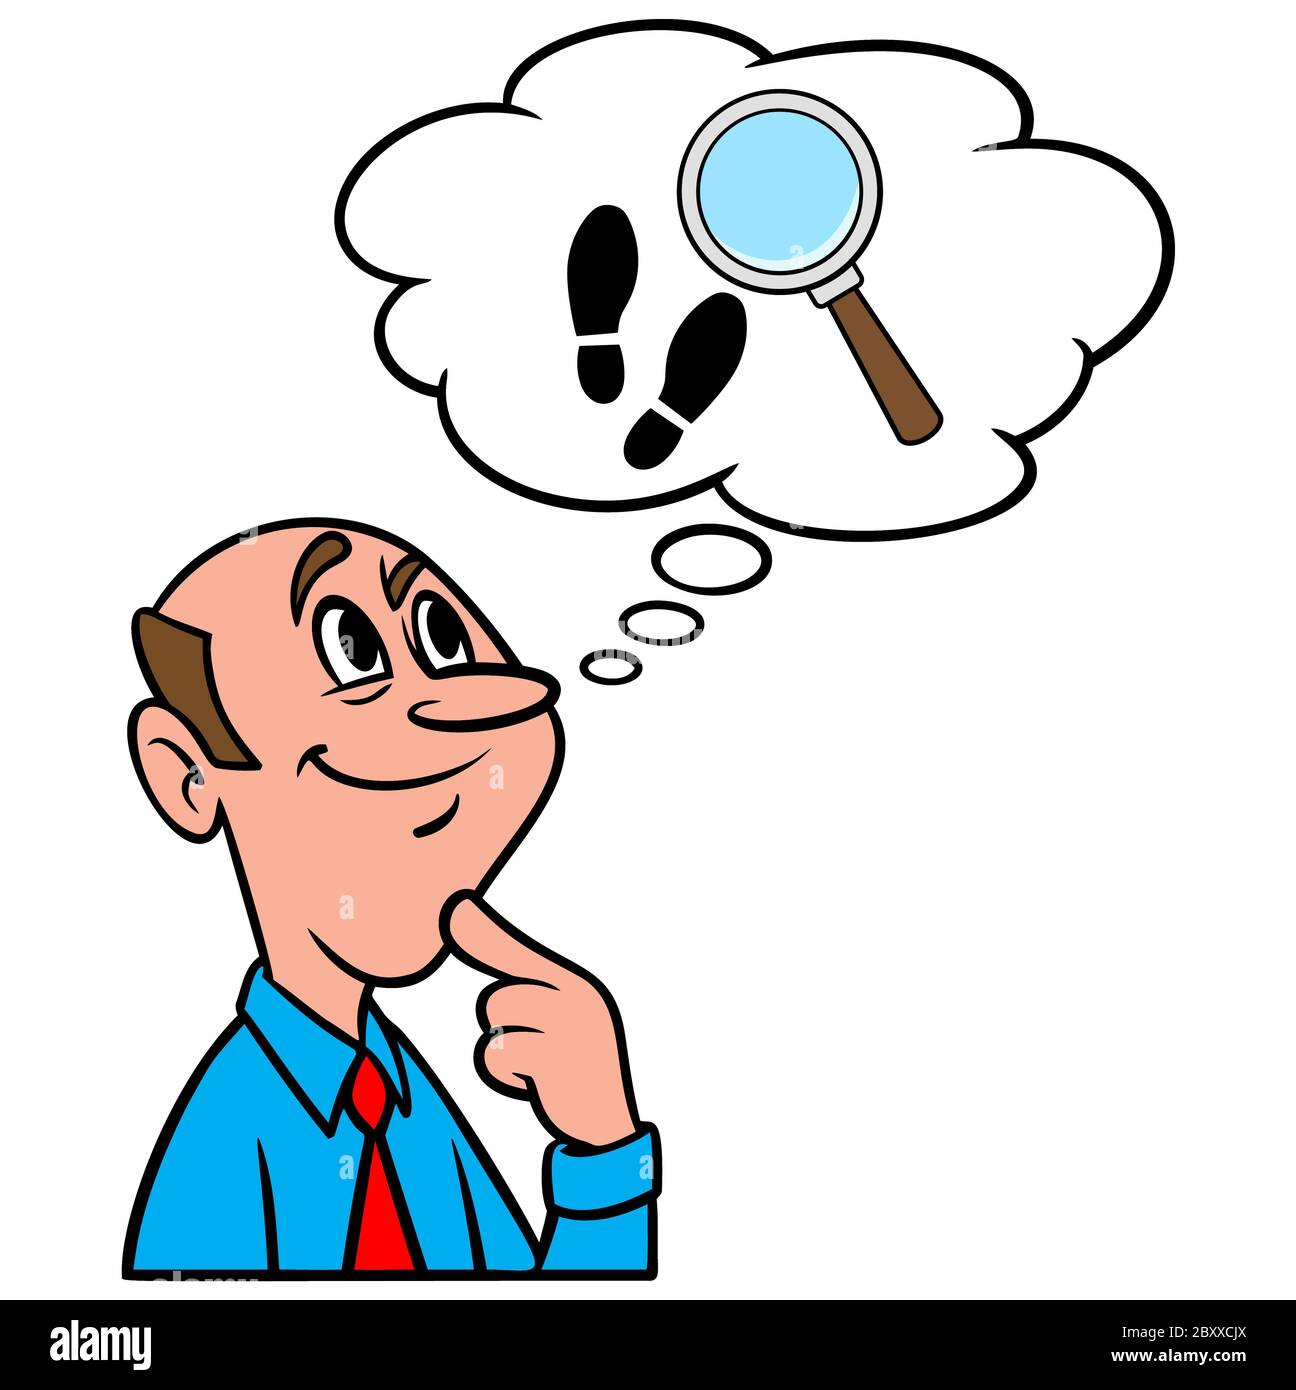 Thinking About Investigating- An Illustration of a person Thinking About Investigating. Stock Vector